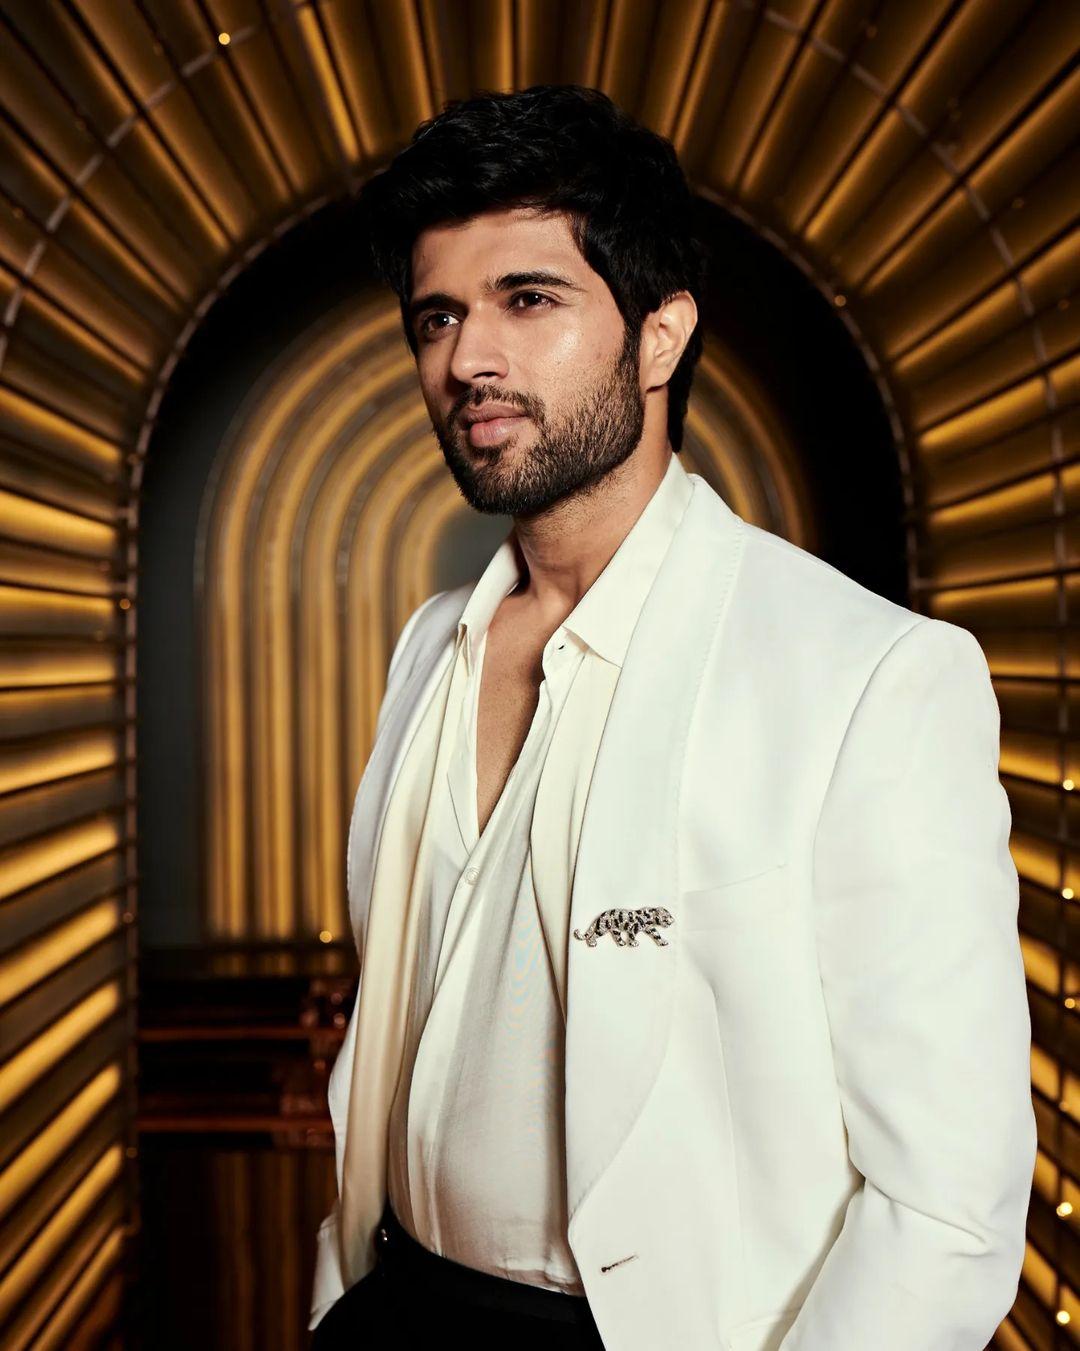 The  'Arjun Reddy' actor looked handsome in a classic white shirt, white blazer, and black pants. He elevated his outfit with a stylish pair of shiny slip-on oxfords